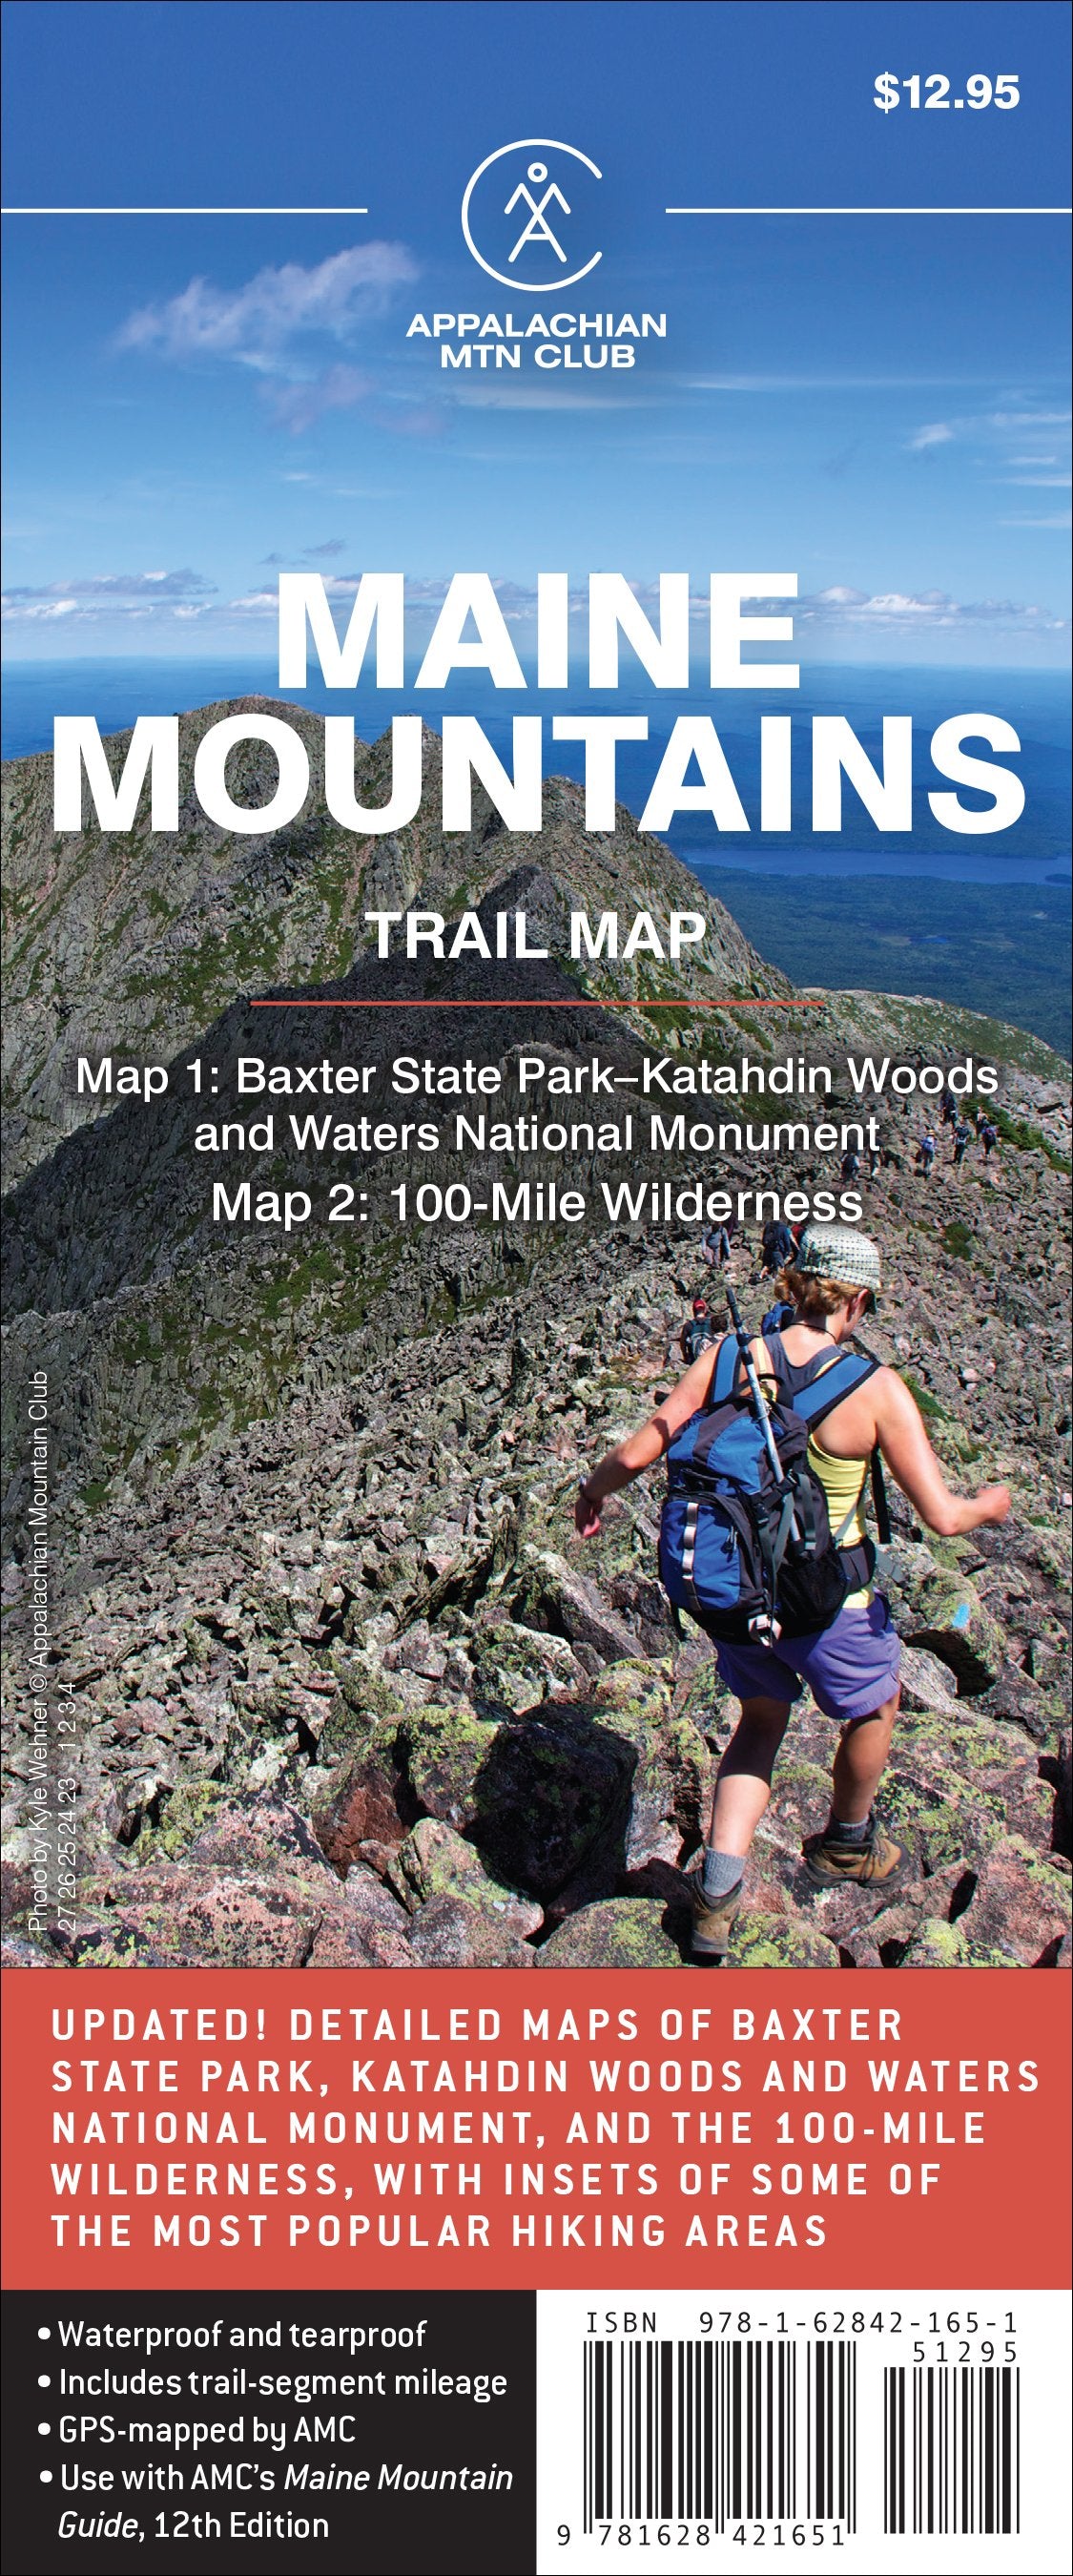 Maine Mountains Trail Map 1-2: Baxter State Park–Katahdin Woods Waters National Monument and 100-Mile Wilderness